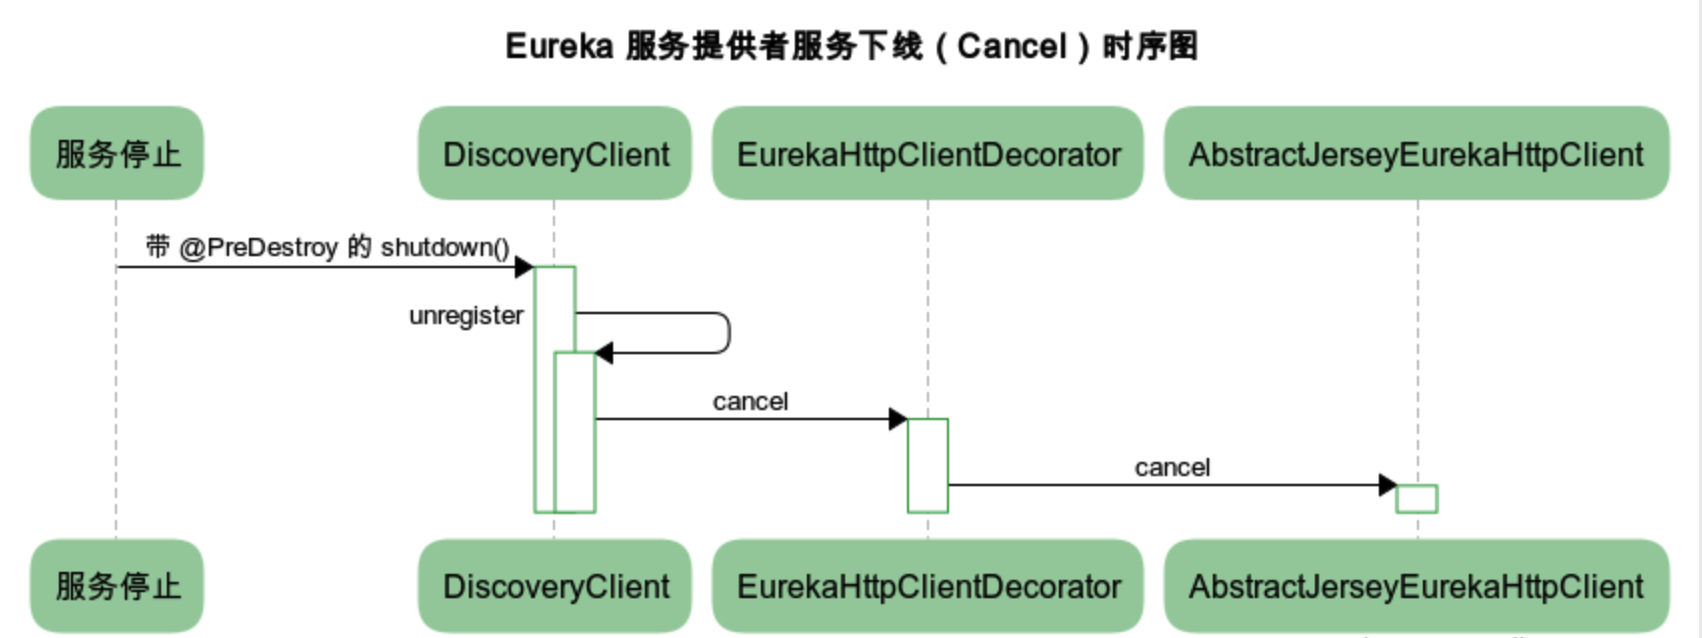 images/eureka-service-provider-cancel-sequence-chart.png